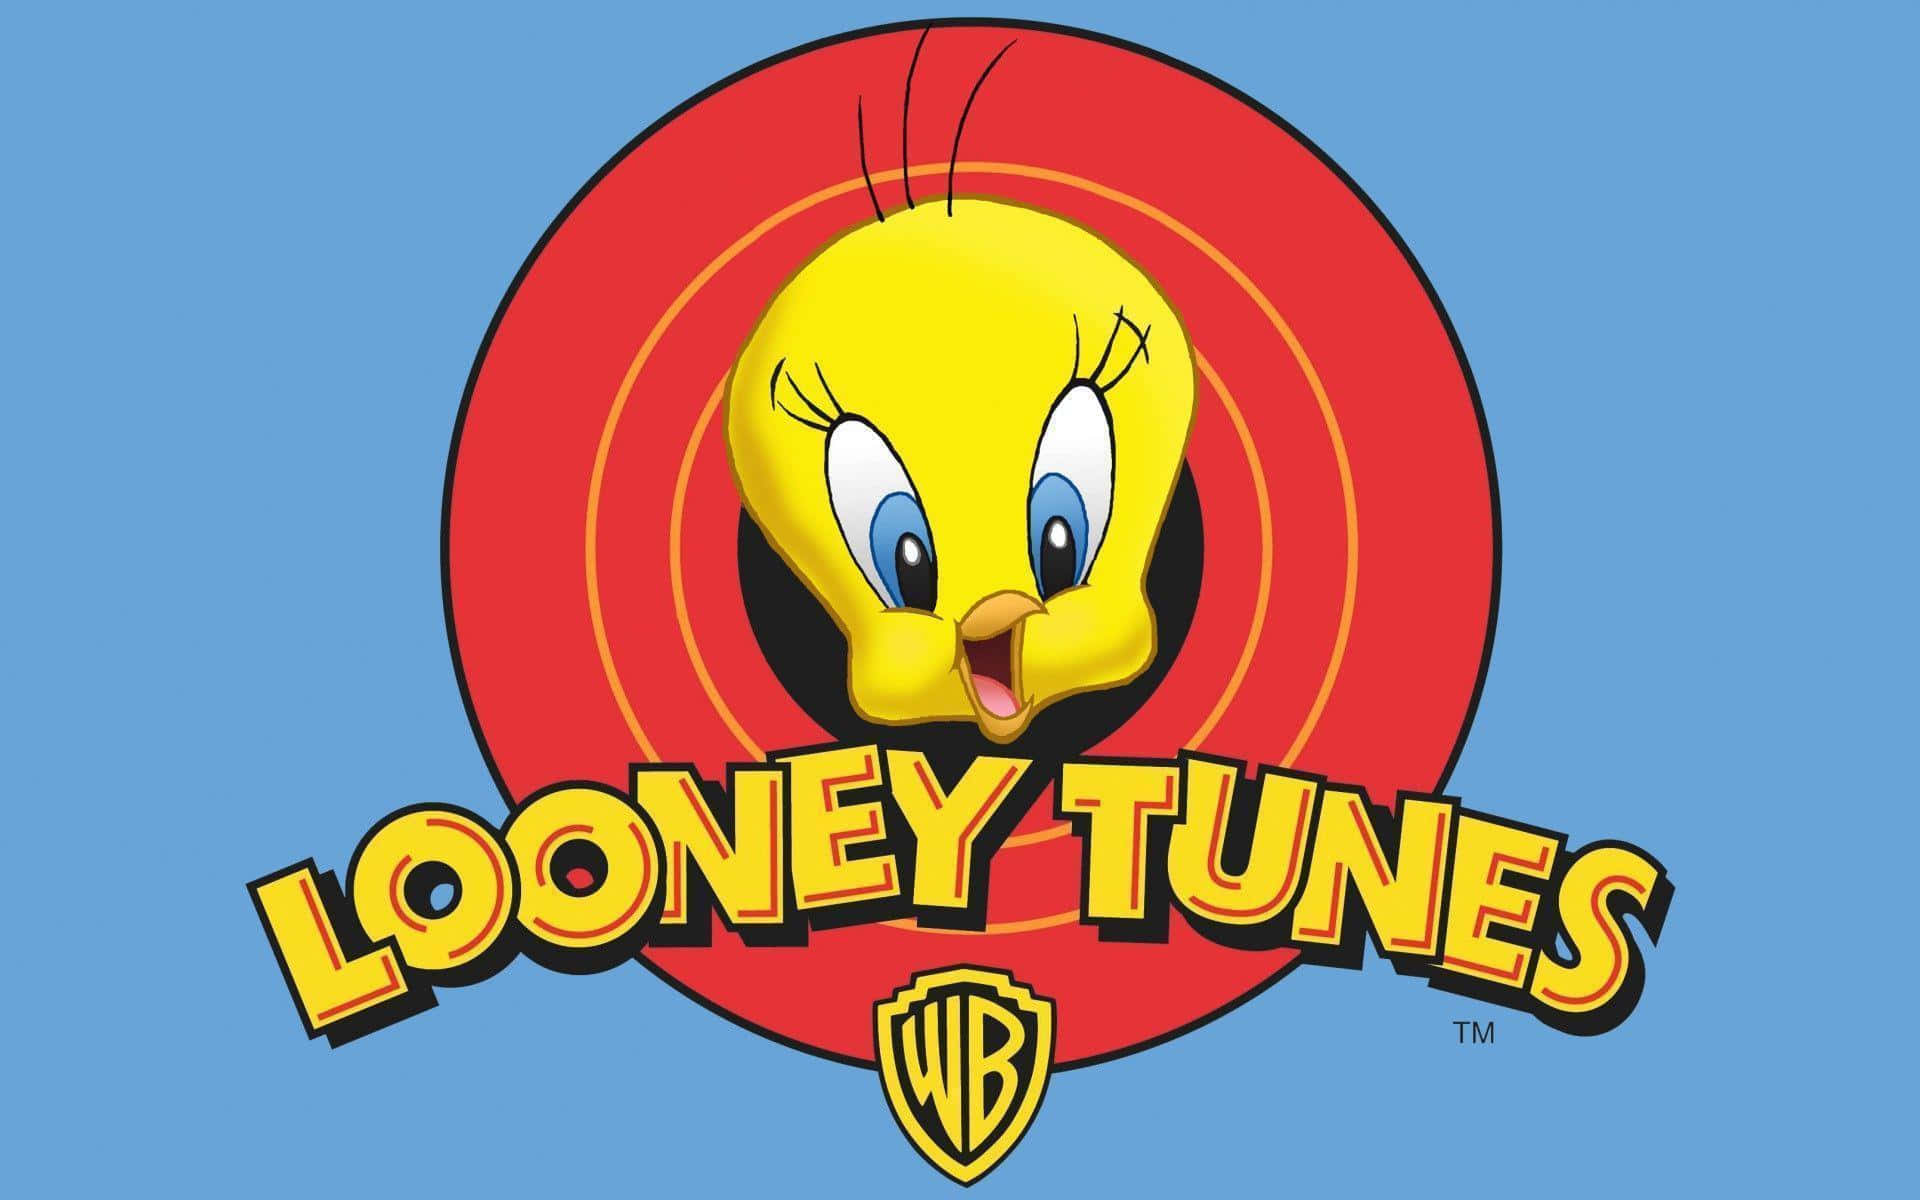 Celebrate the Heart of Laughter with Looney Tunes